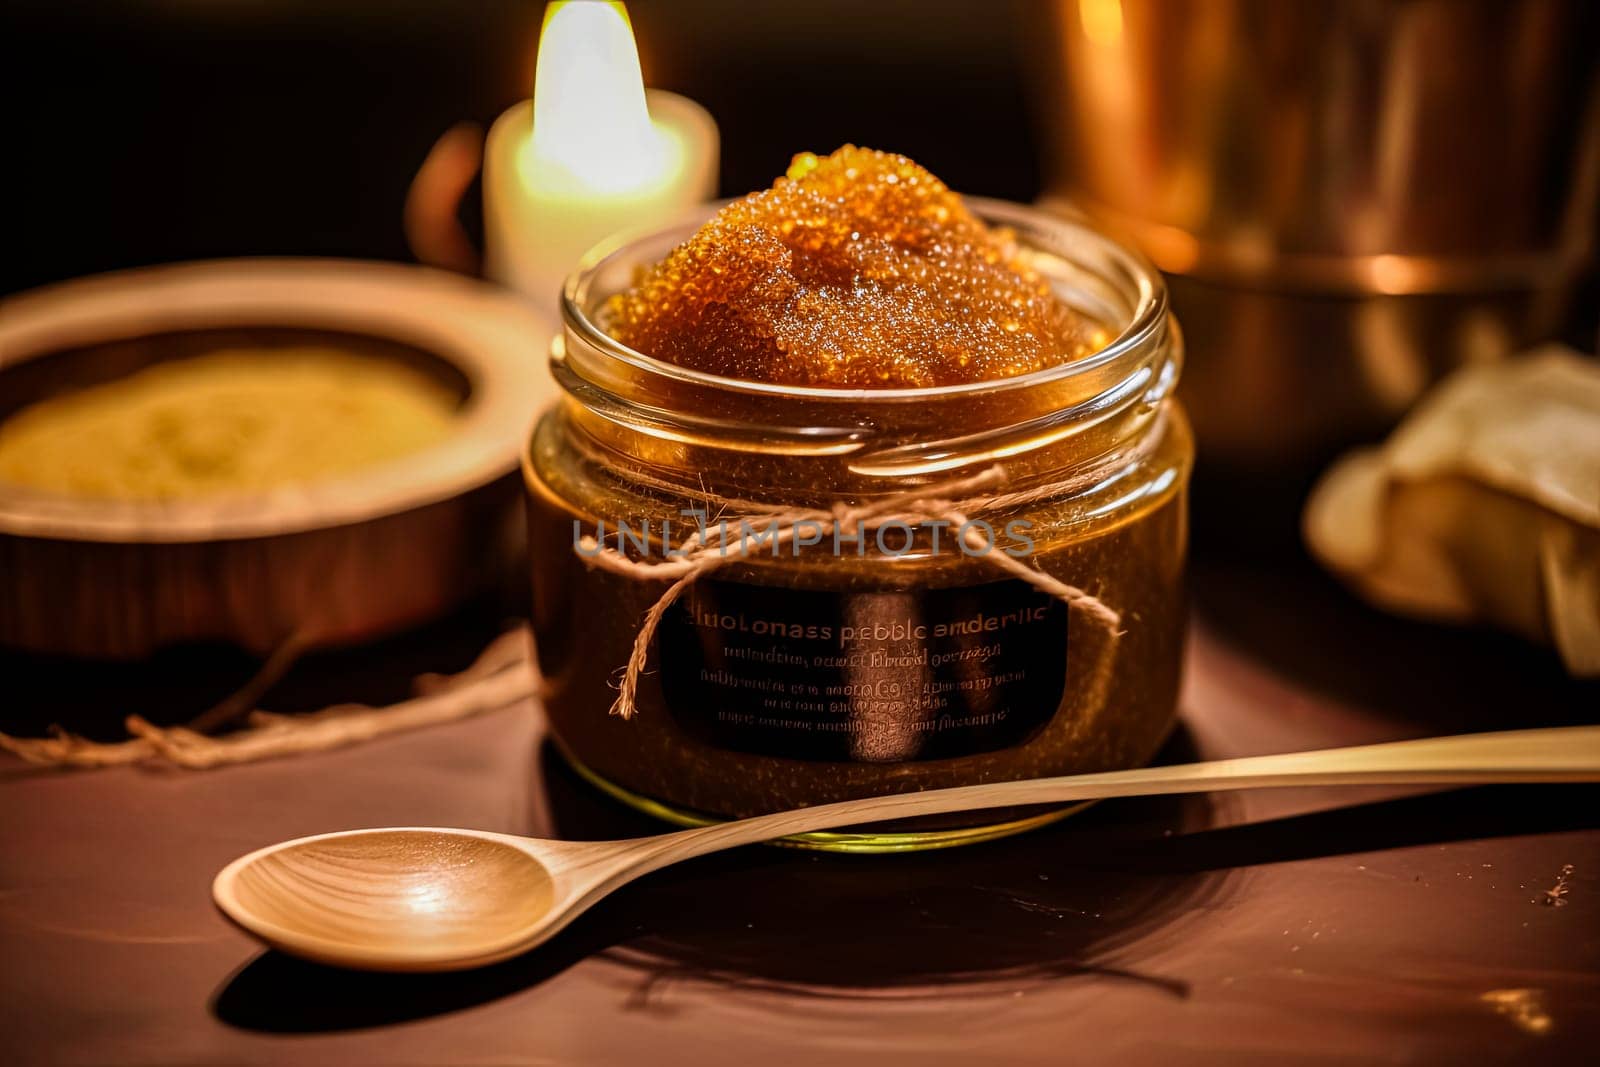 Treat your skin to our coffee-infused sugar cellulite scrub in a sleek glass jar. Perfect for exfoliating and rejuvenating your body's natural glow.